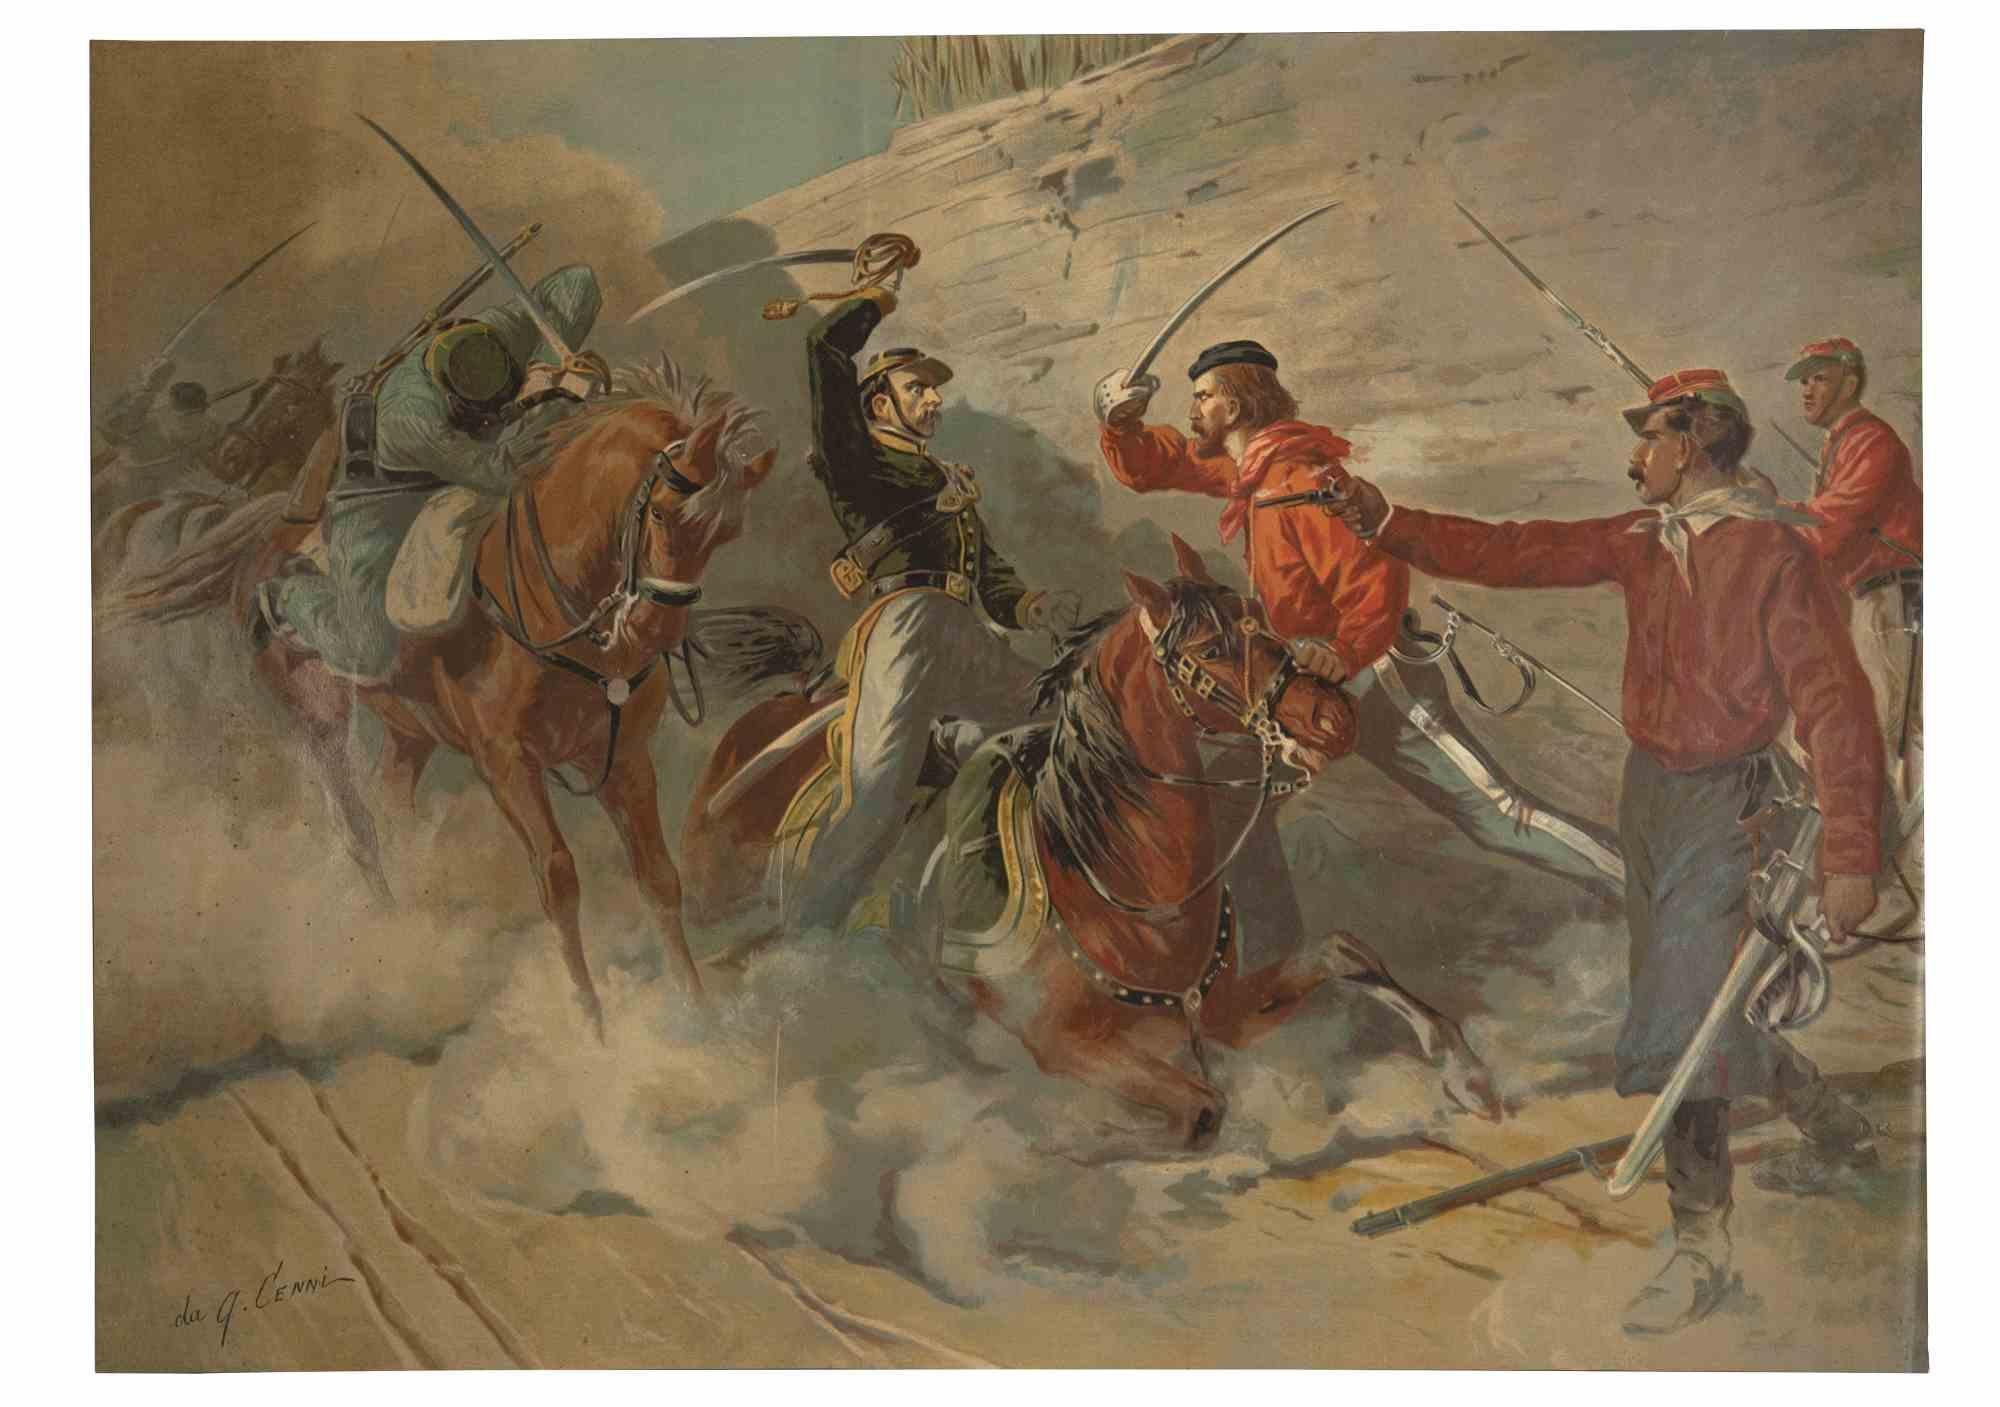 Garibaldinian Soldiers is an original Modern Artwork realized in the late 19th Century after Quinto Cenni.

Lithograph on paper. 

The Artwork is depicted through harmonious colors in a well-balanced composition.
